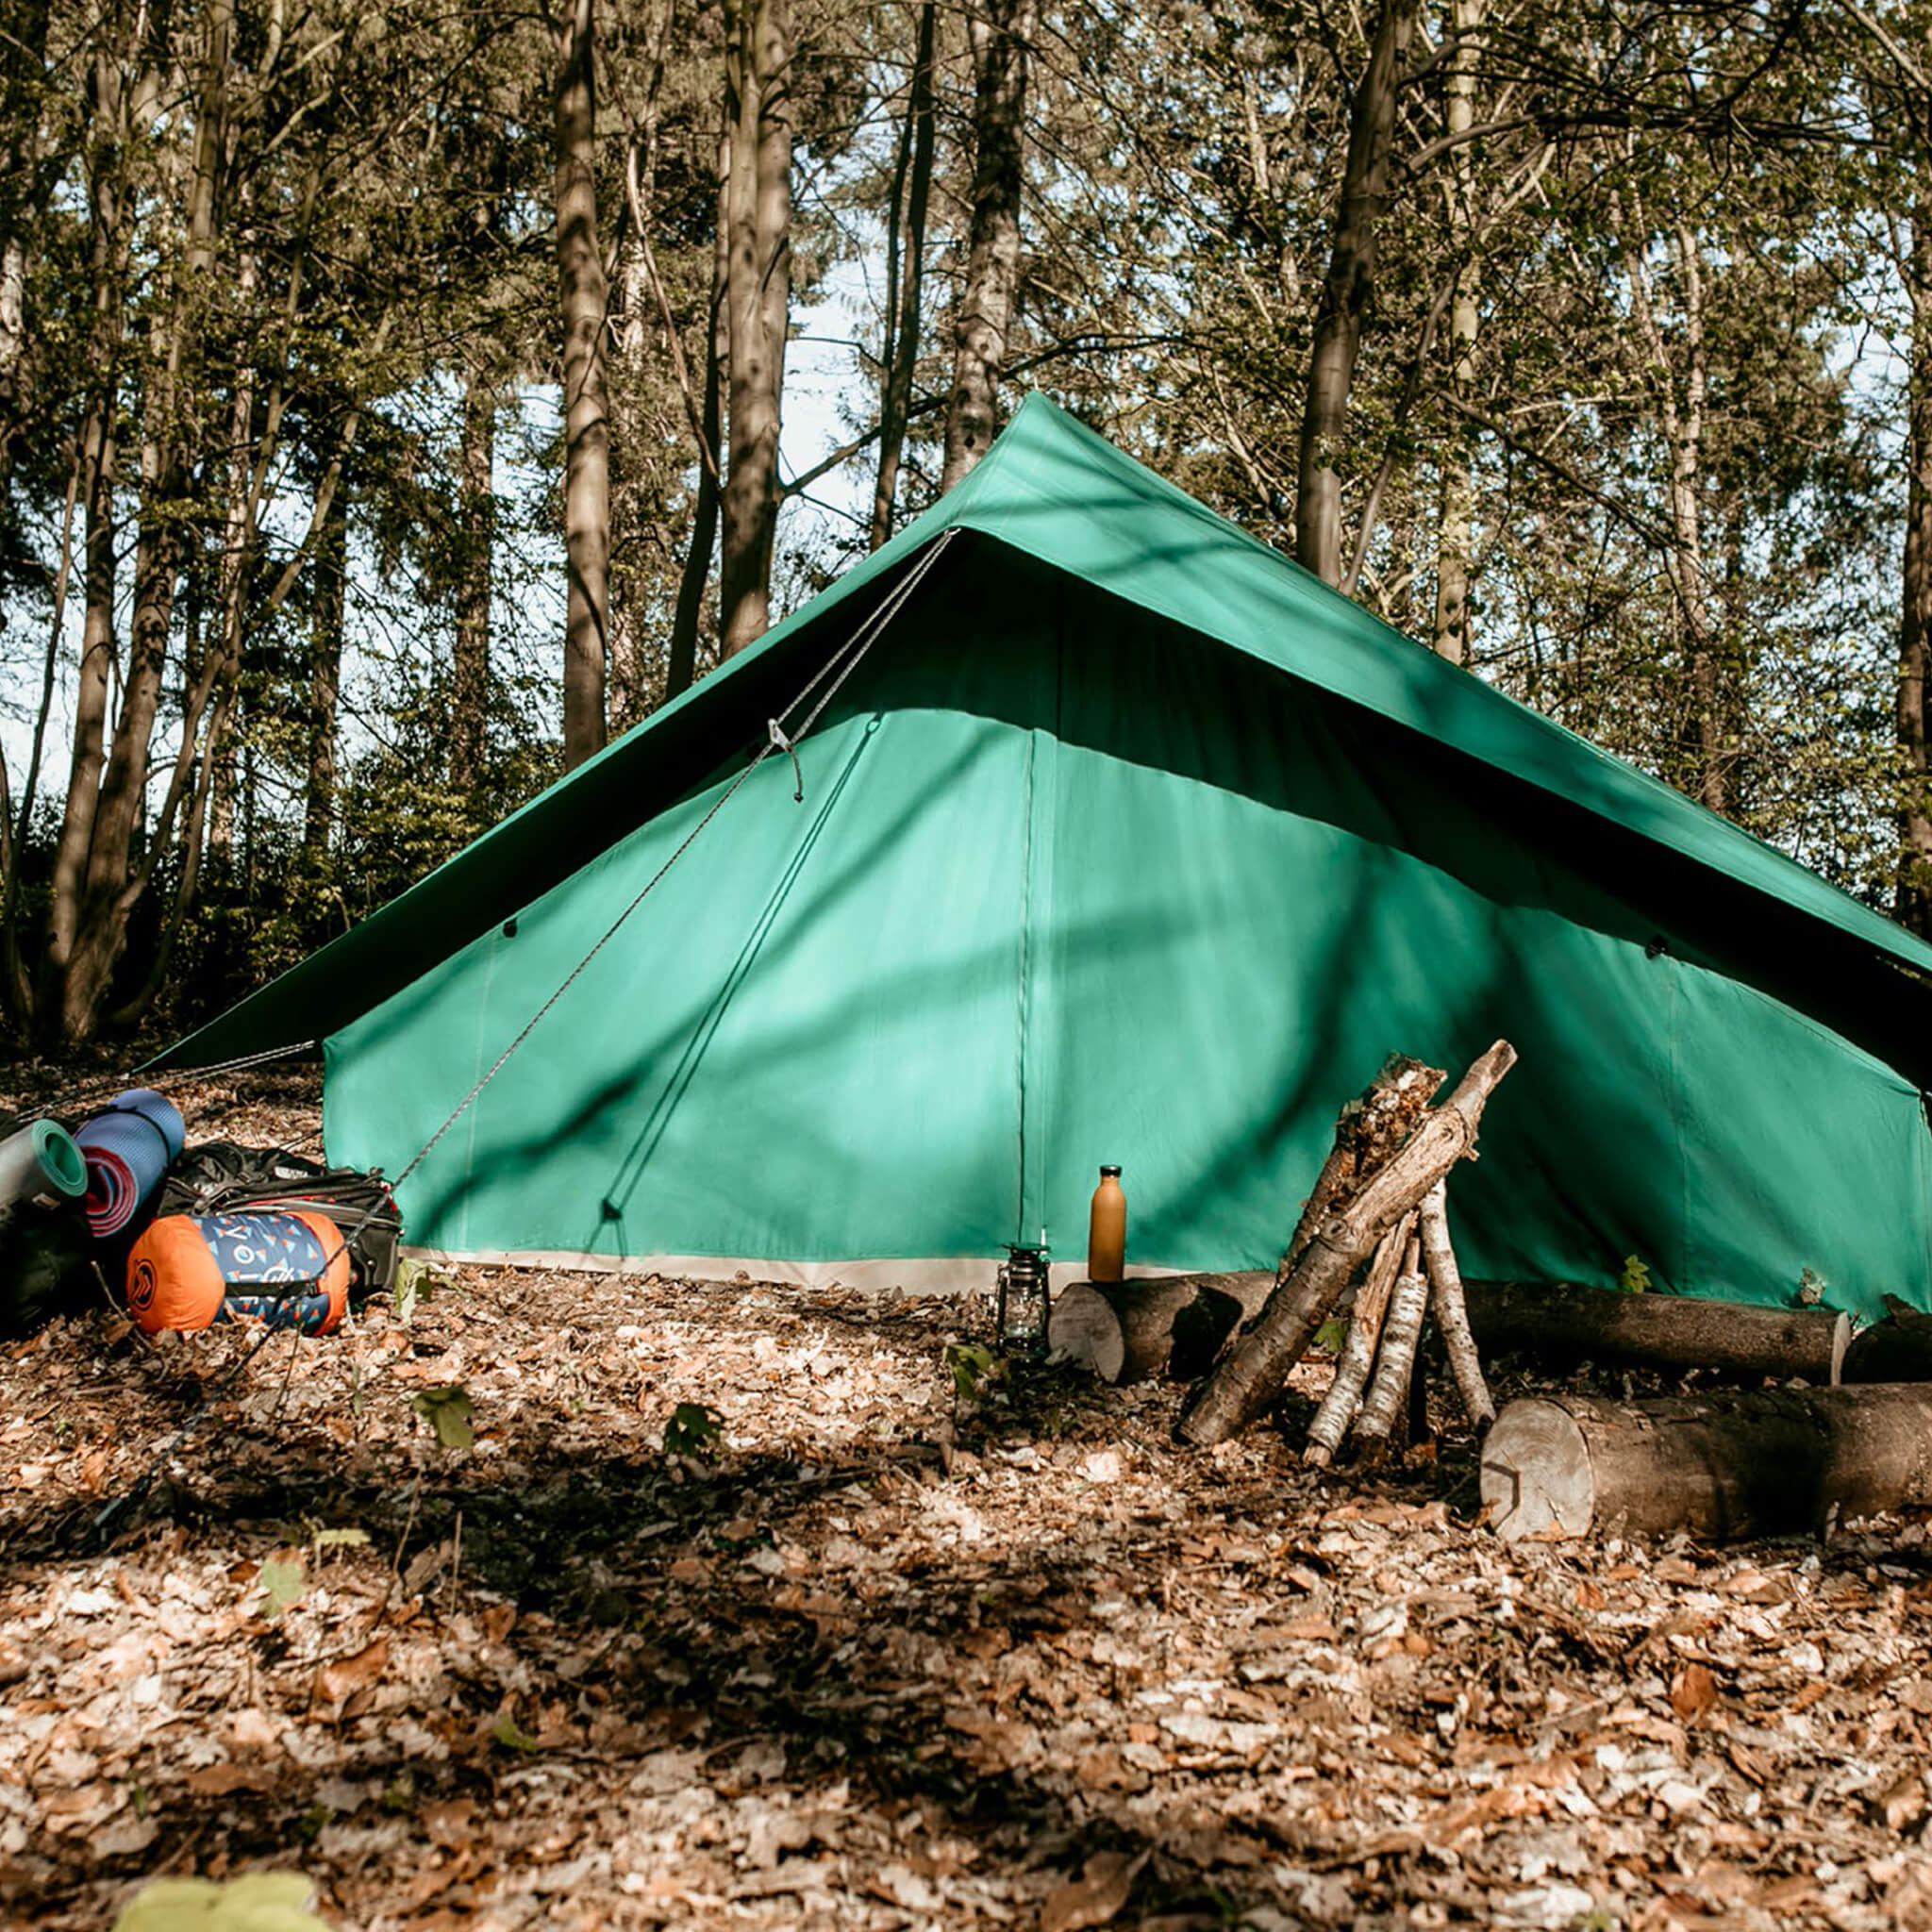 Beyond tents glamping patrol tent scouts